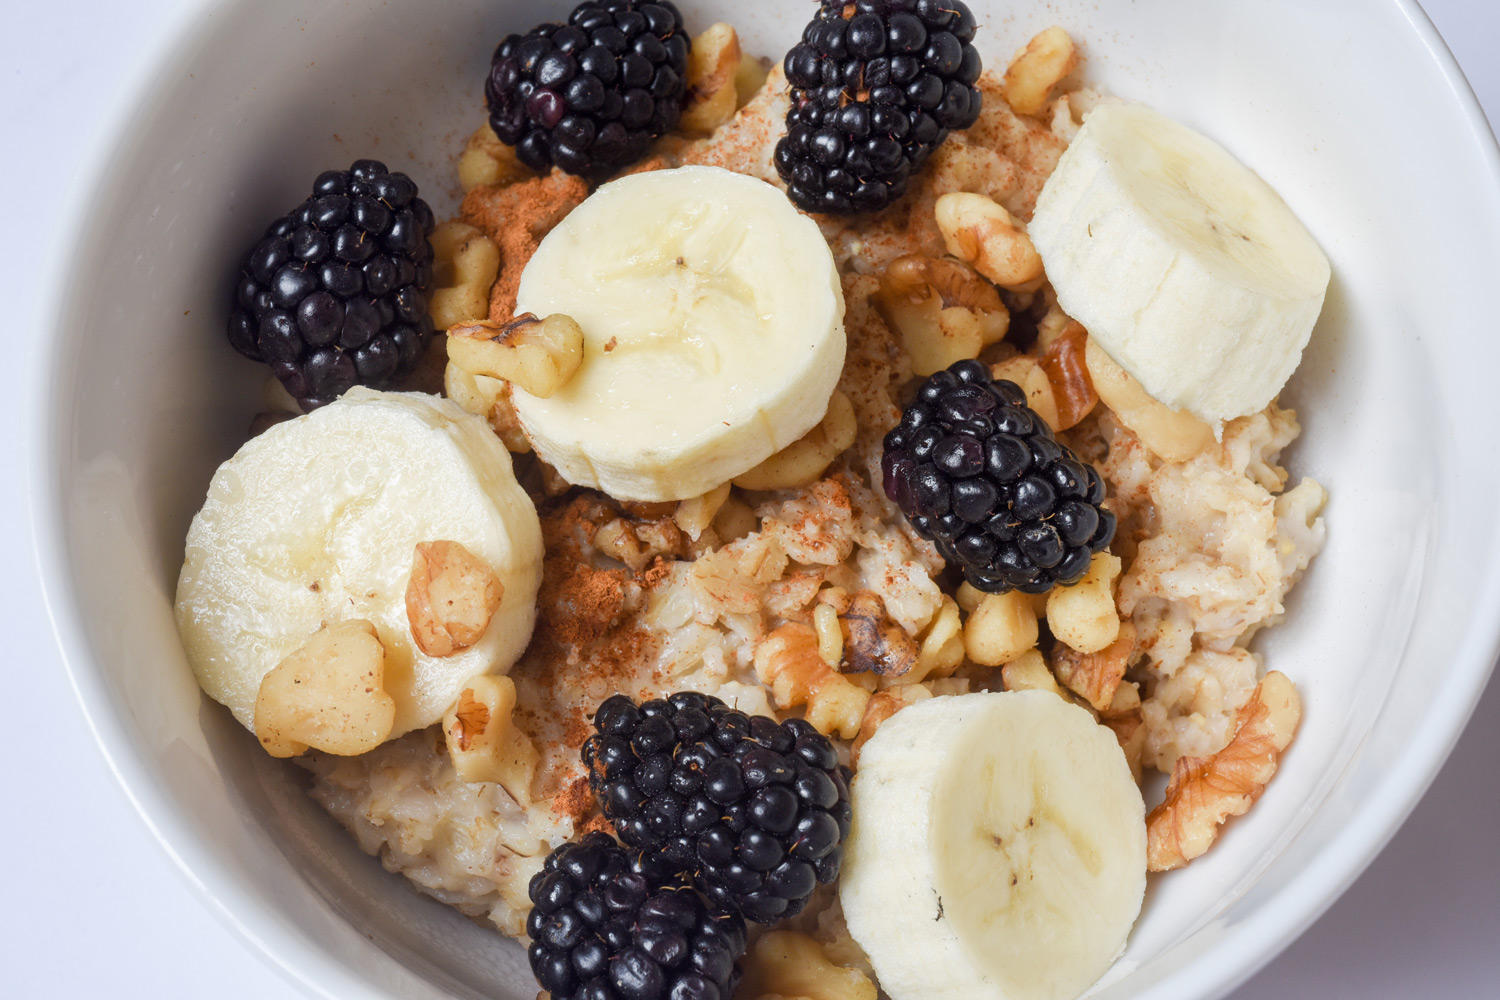 Oats is rich in natural proteins, unsaturated fats, vitamins and other important nutrients